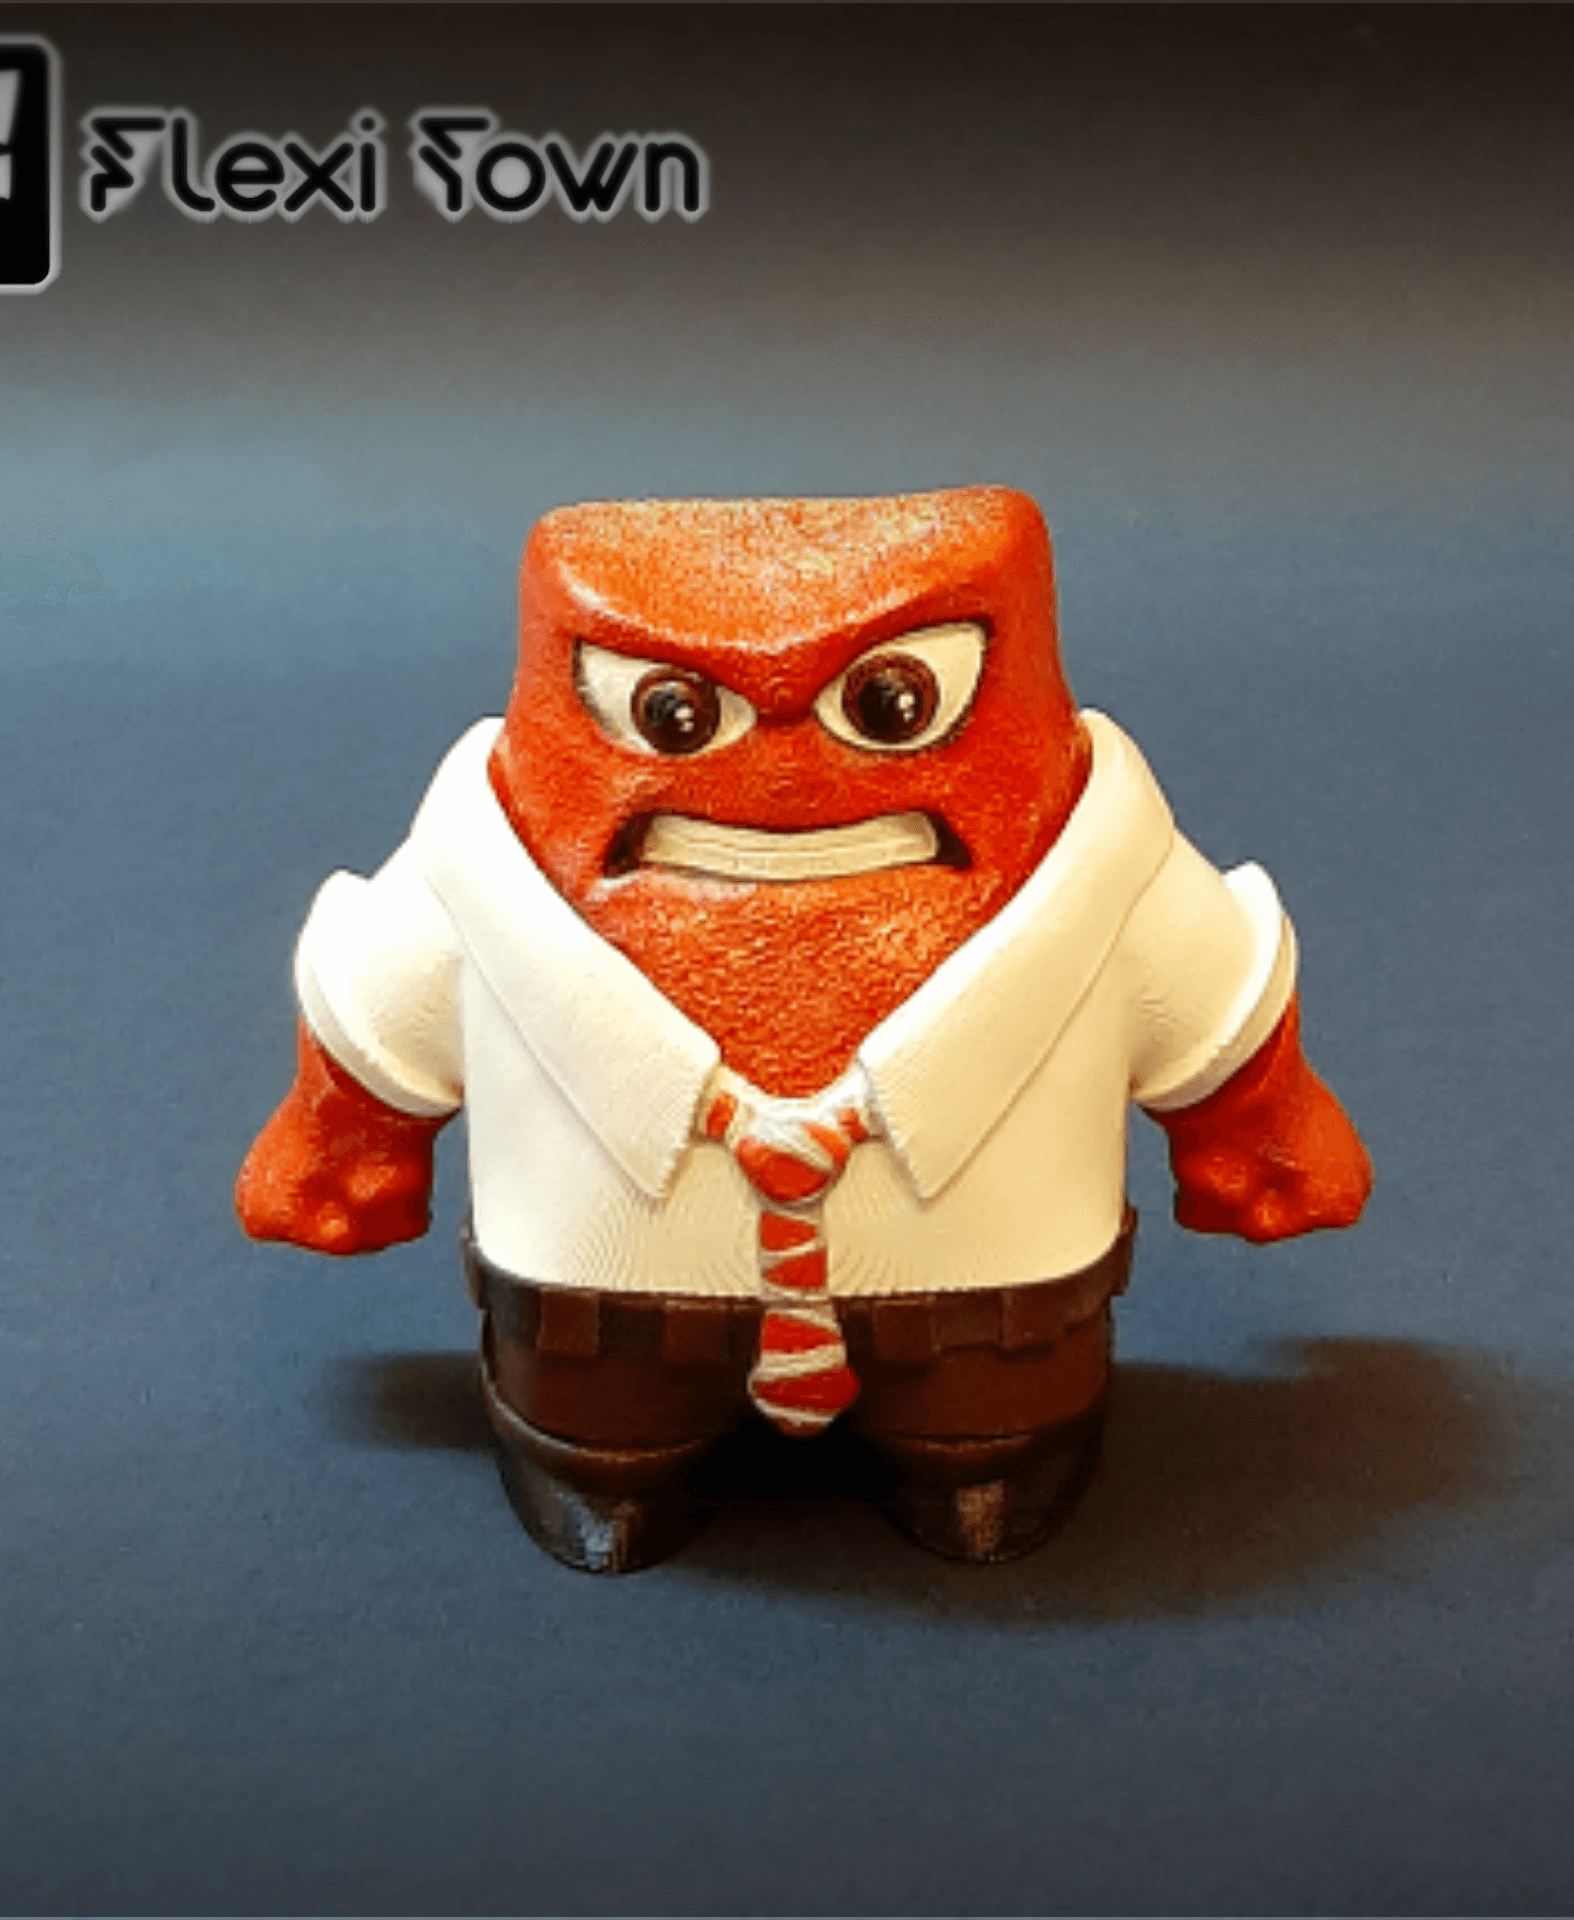 Flexi Print-in-Place Anger 3d model